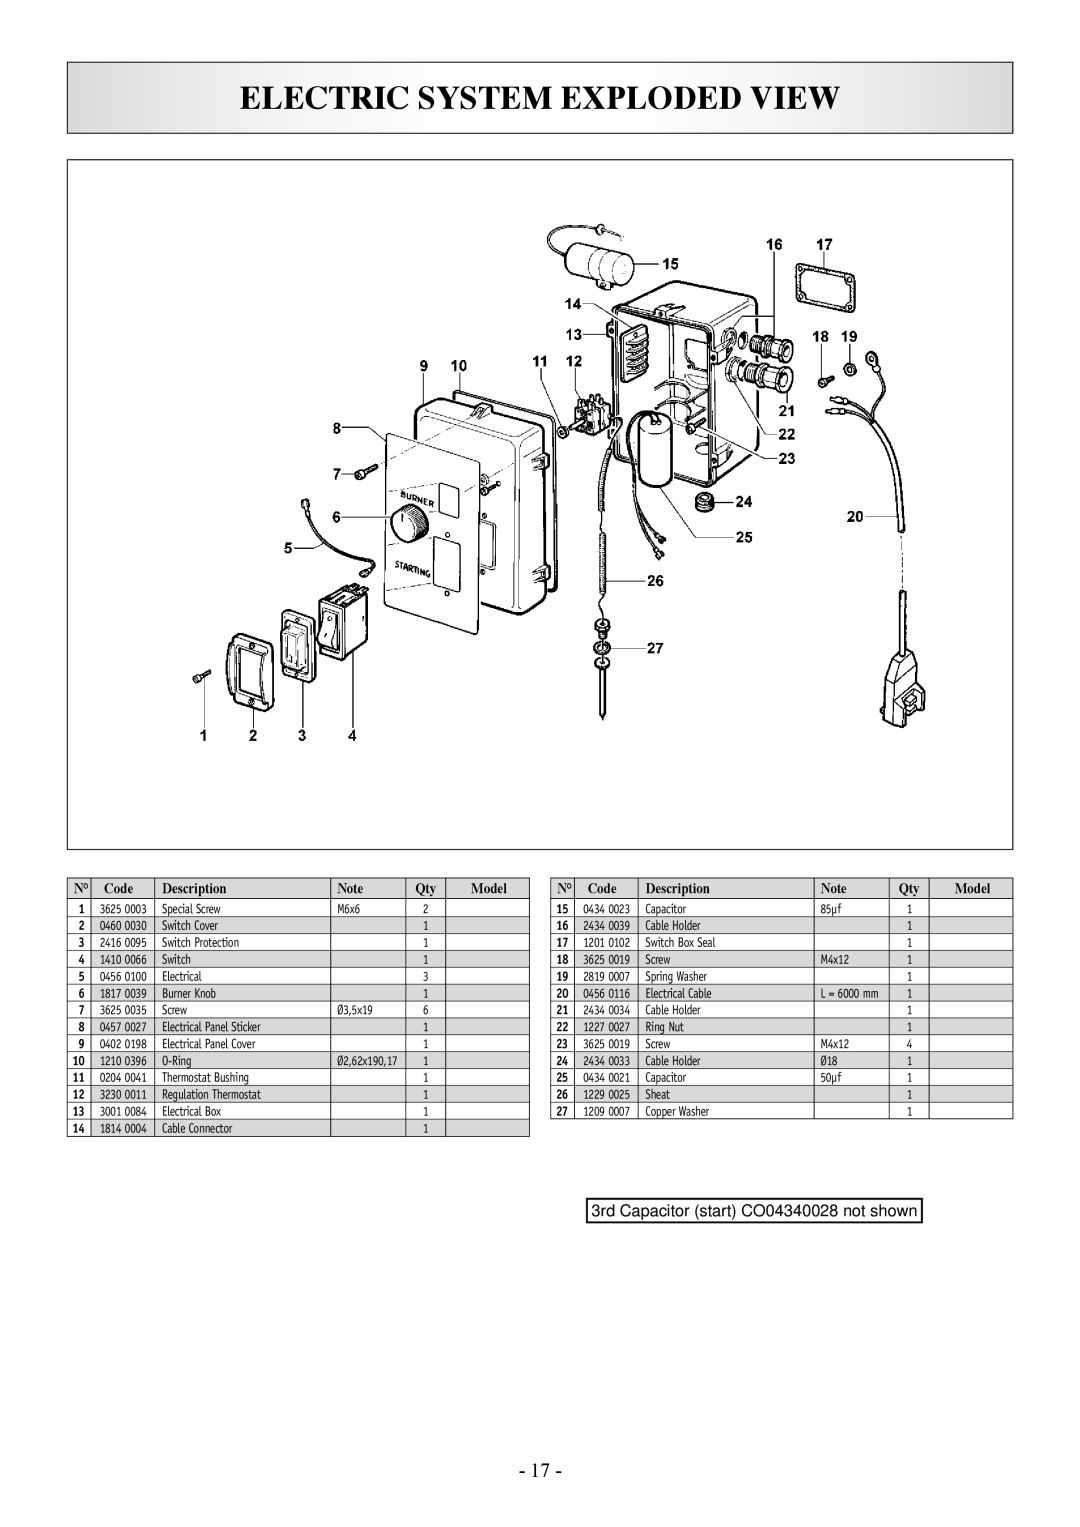 North Star 157394 manual Electric System Exploded View, 3rd Capacitor start CO04340028 not shown, Code, Description, Model 